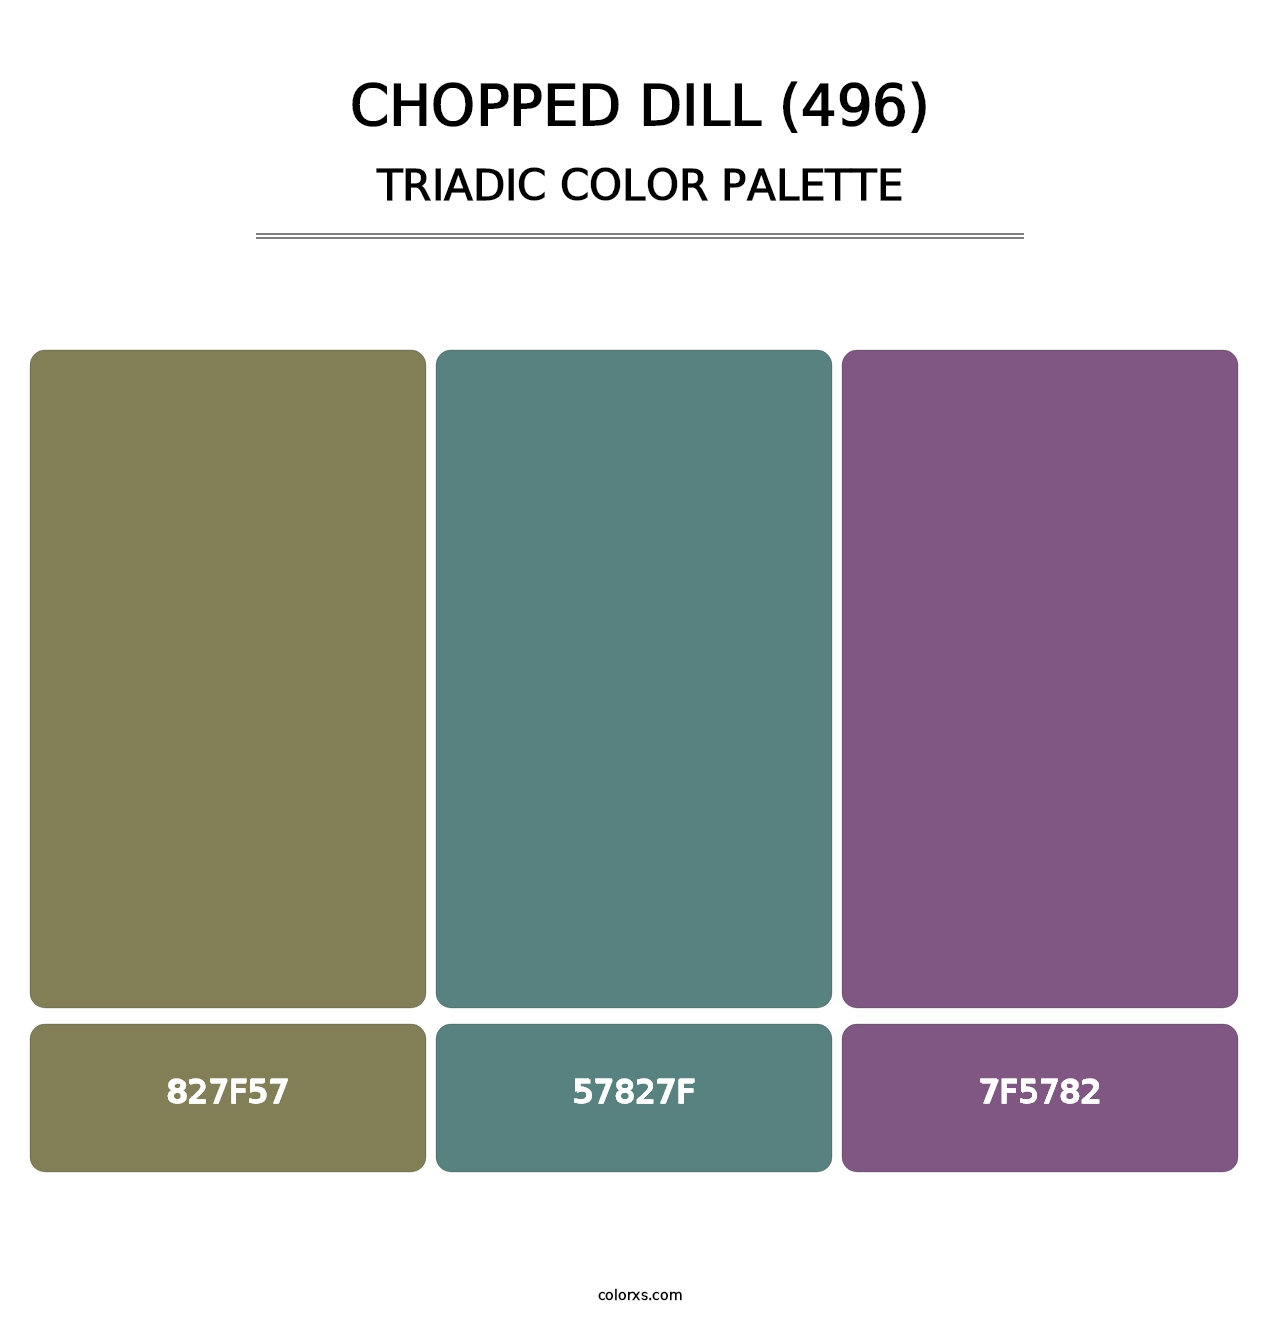 Chopped Dill (496) - Triadic Color Palette